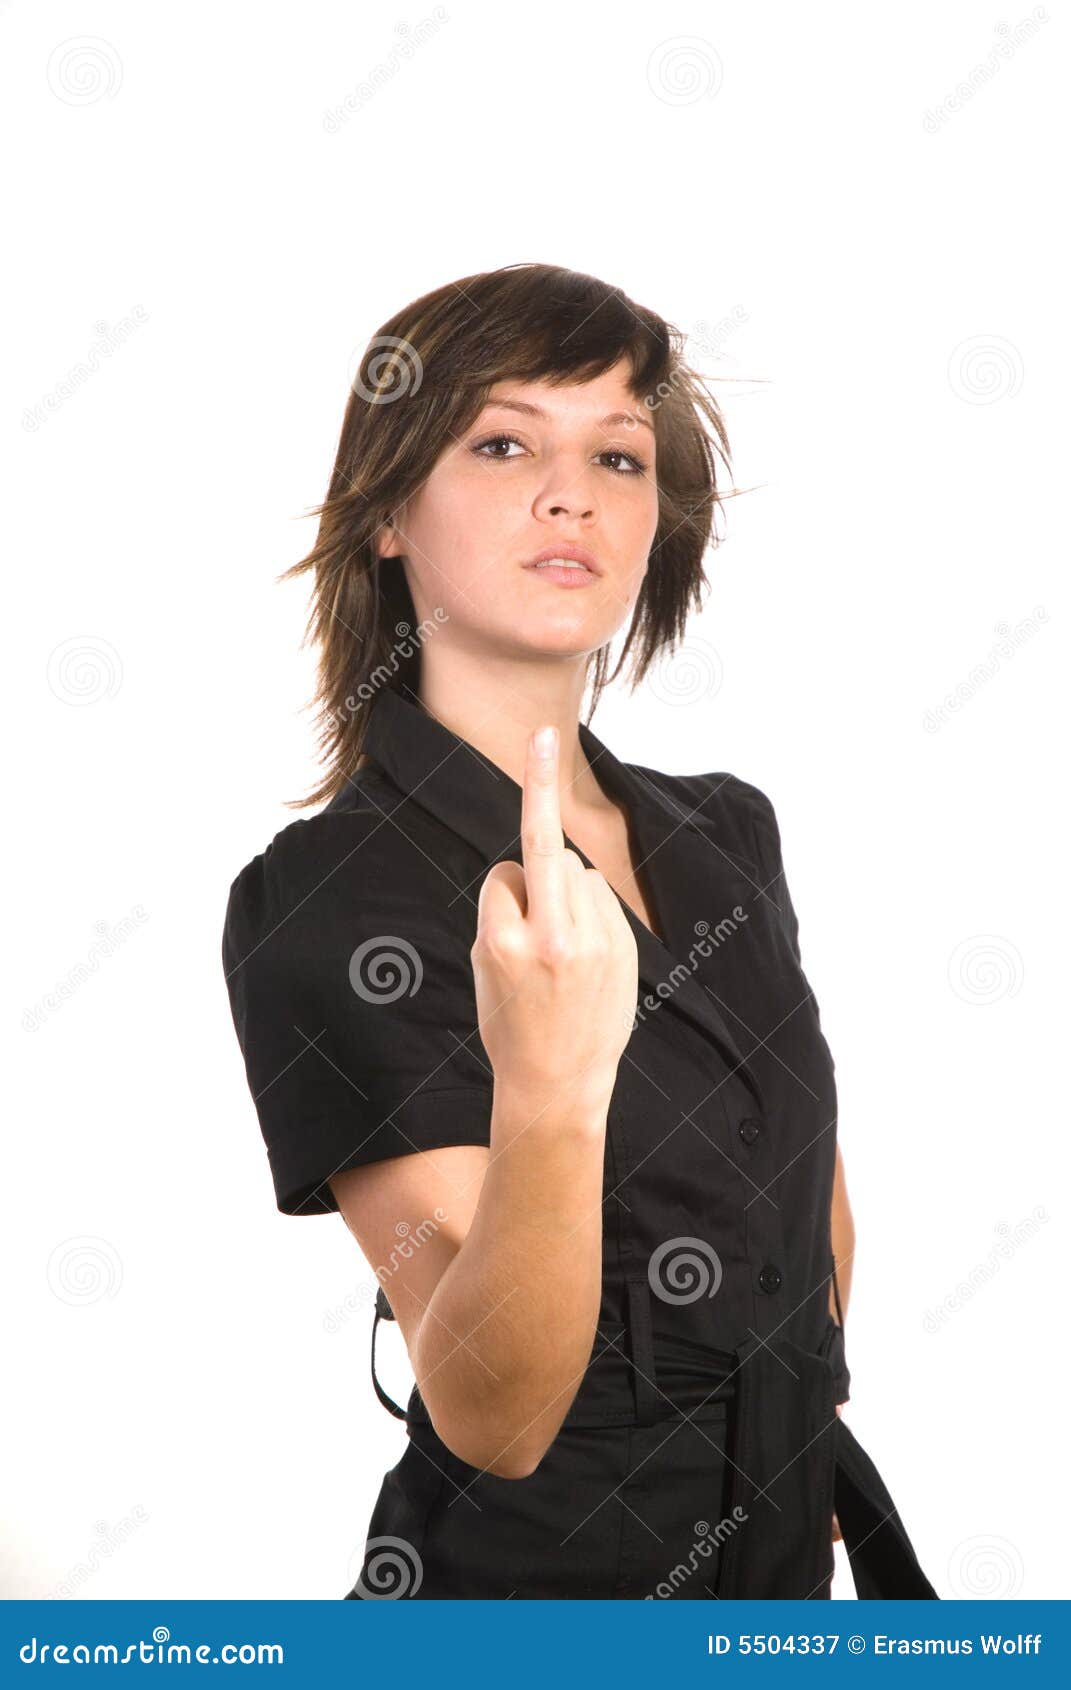 andrew dewick add girl giving middle finger photo